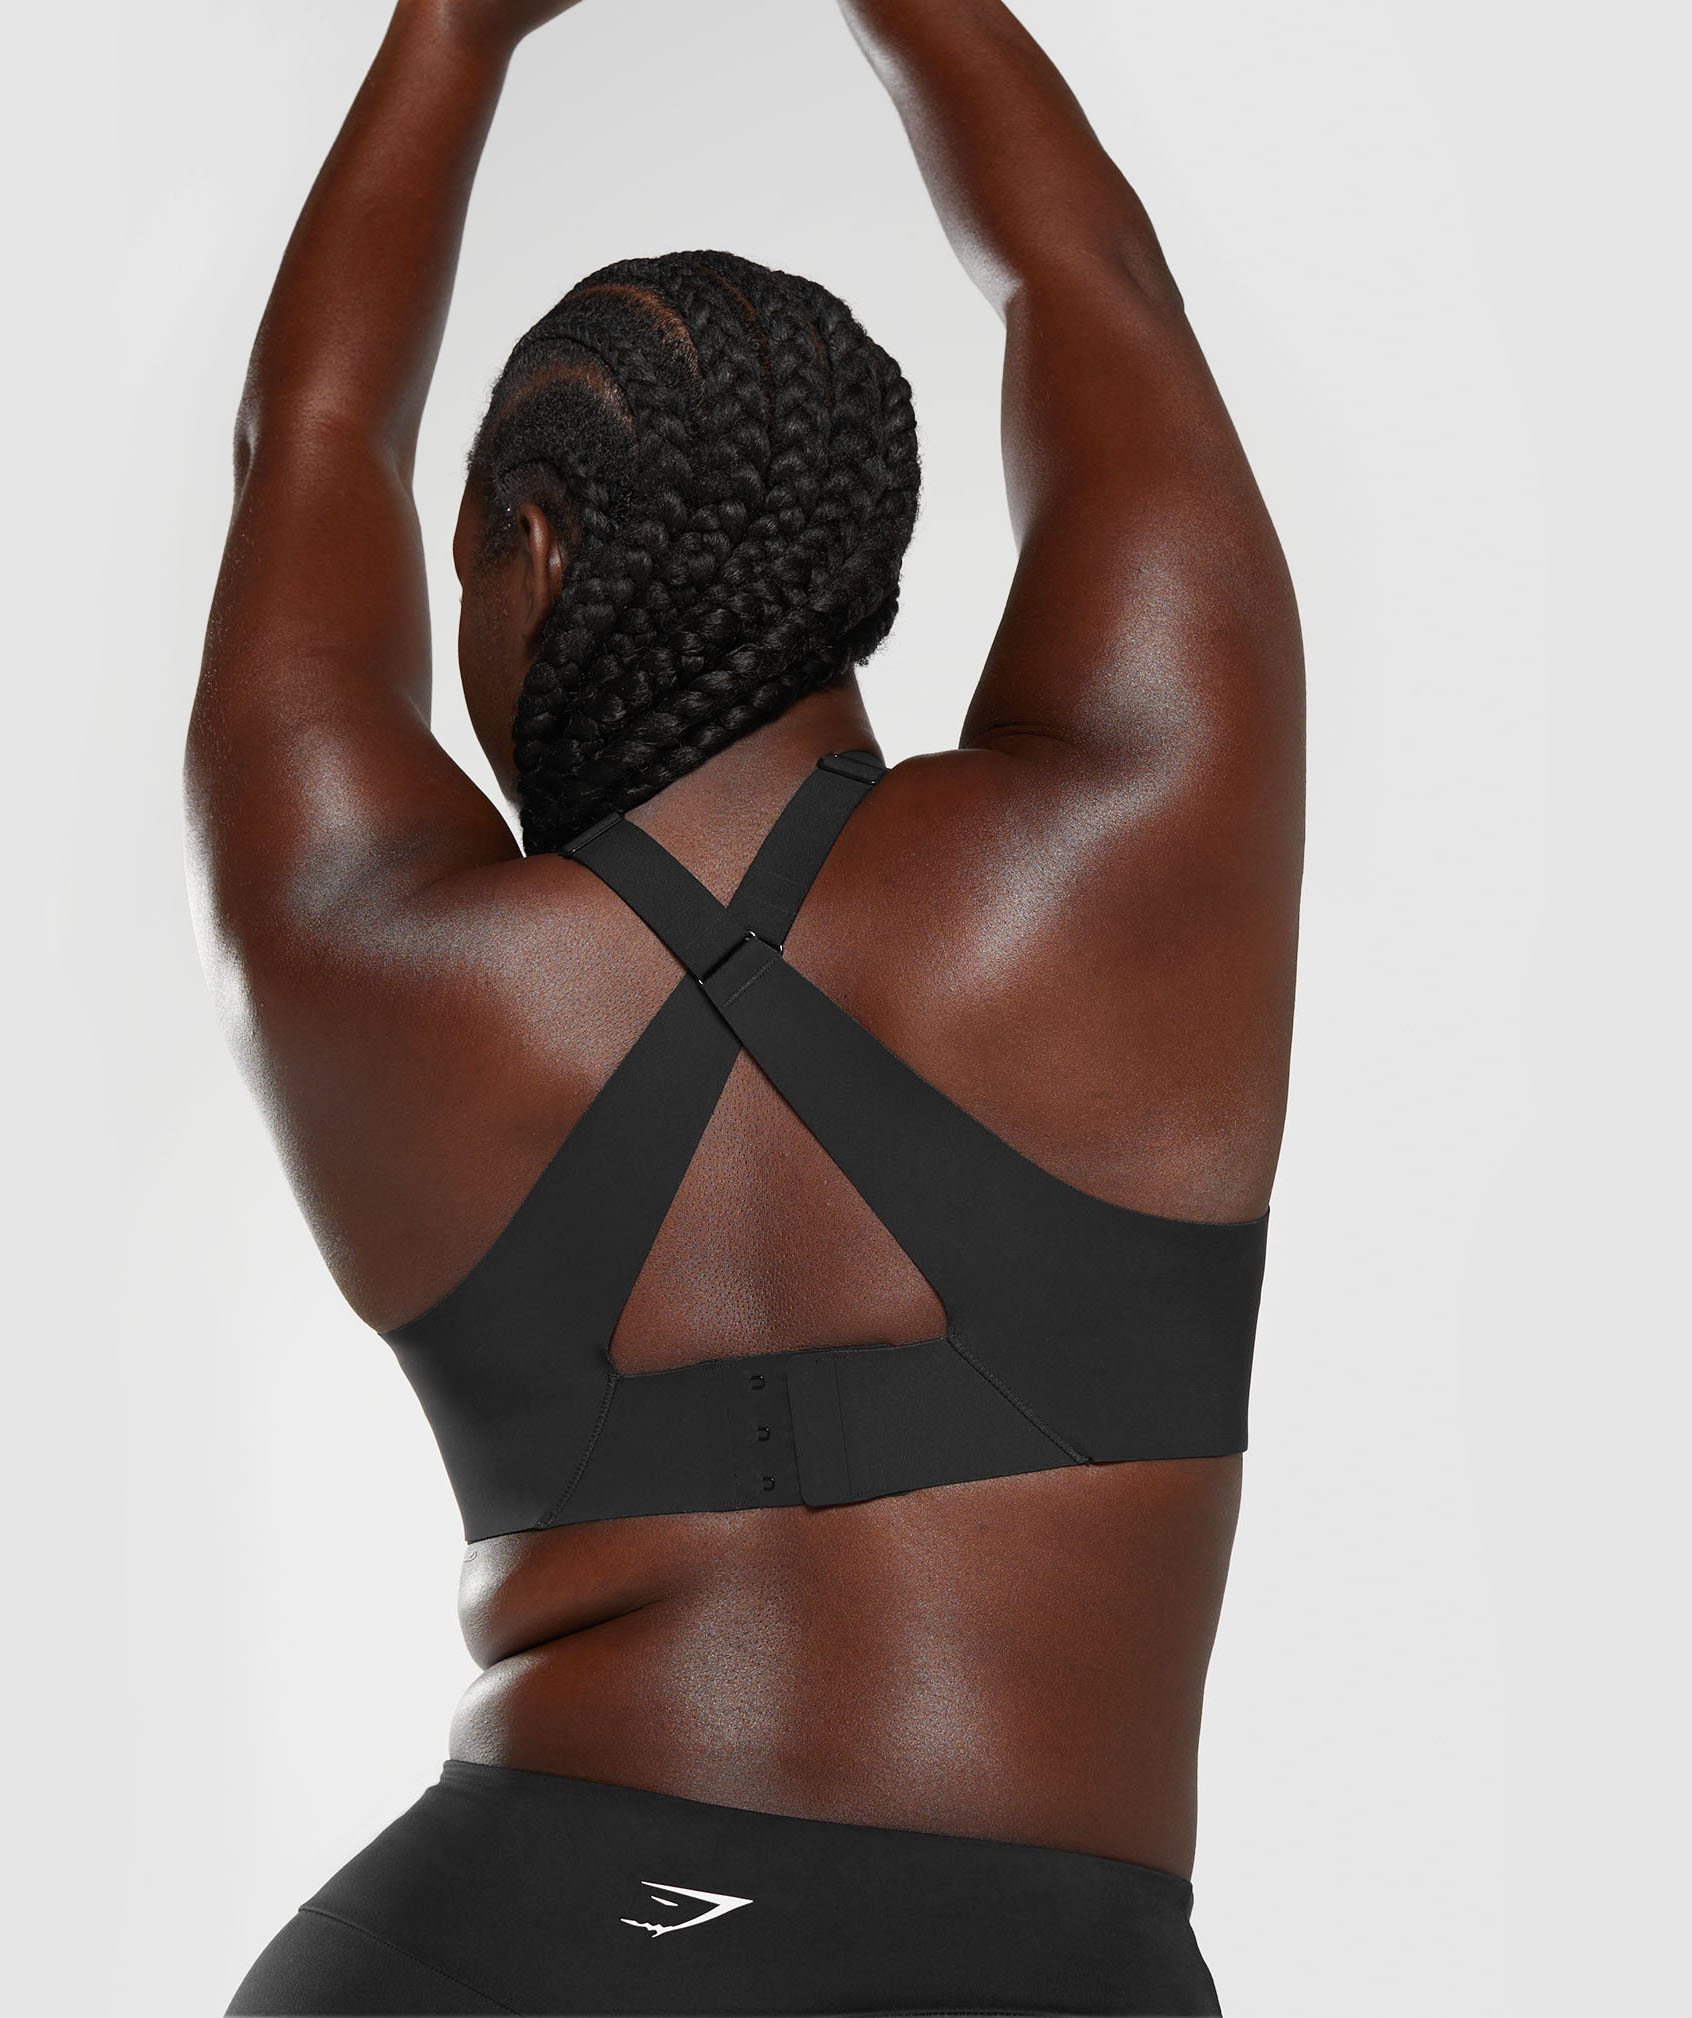 7 Things a Pro Wants You to Know About Your Sports Bra